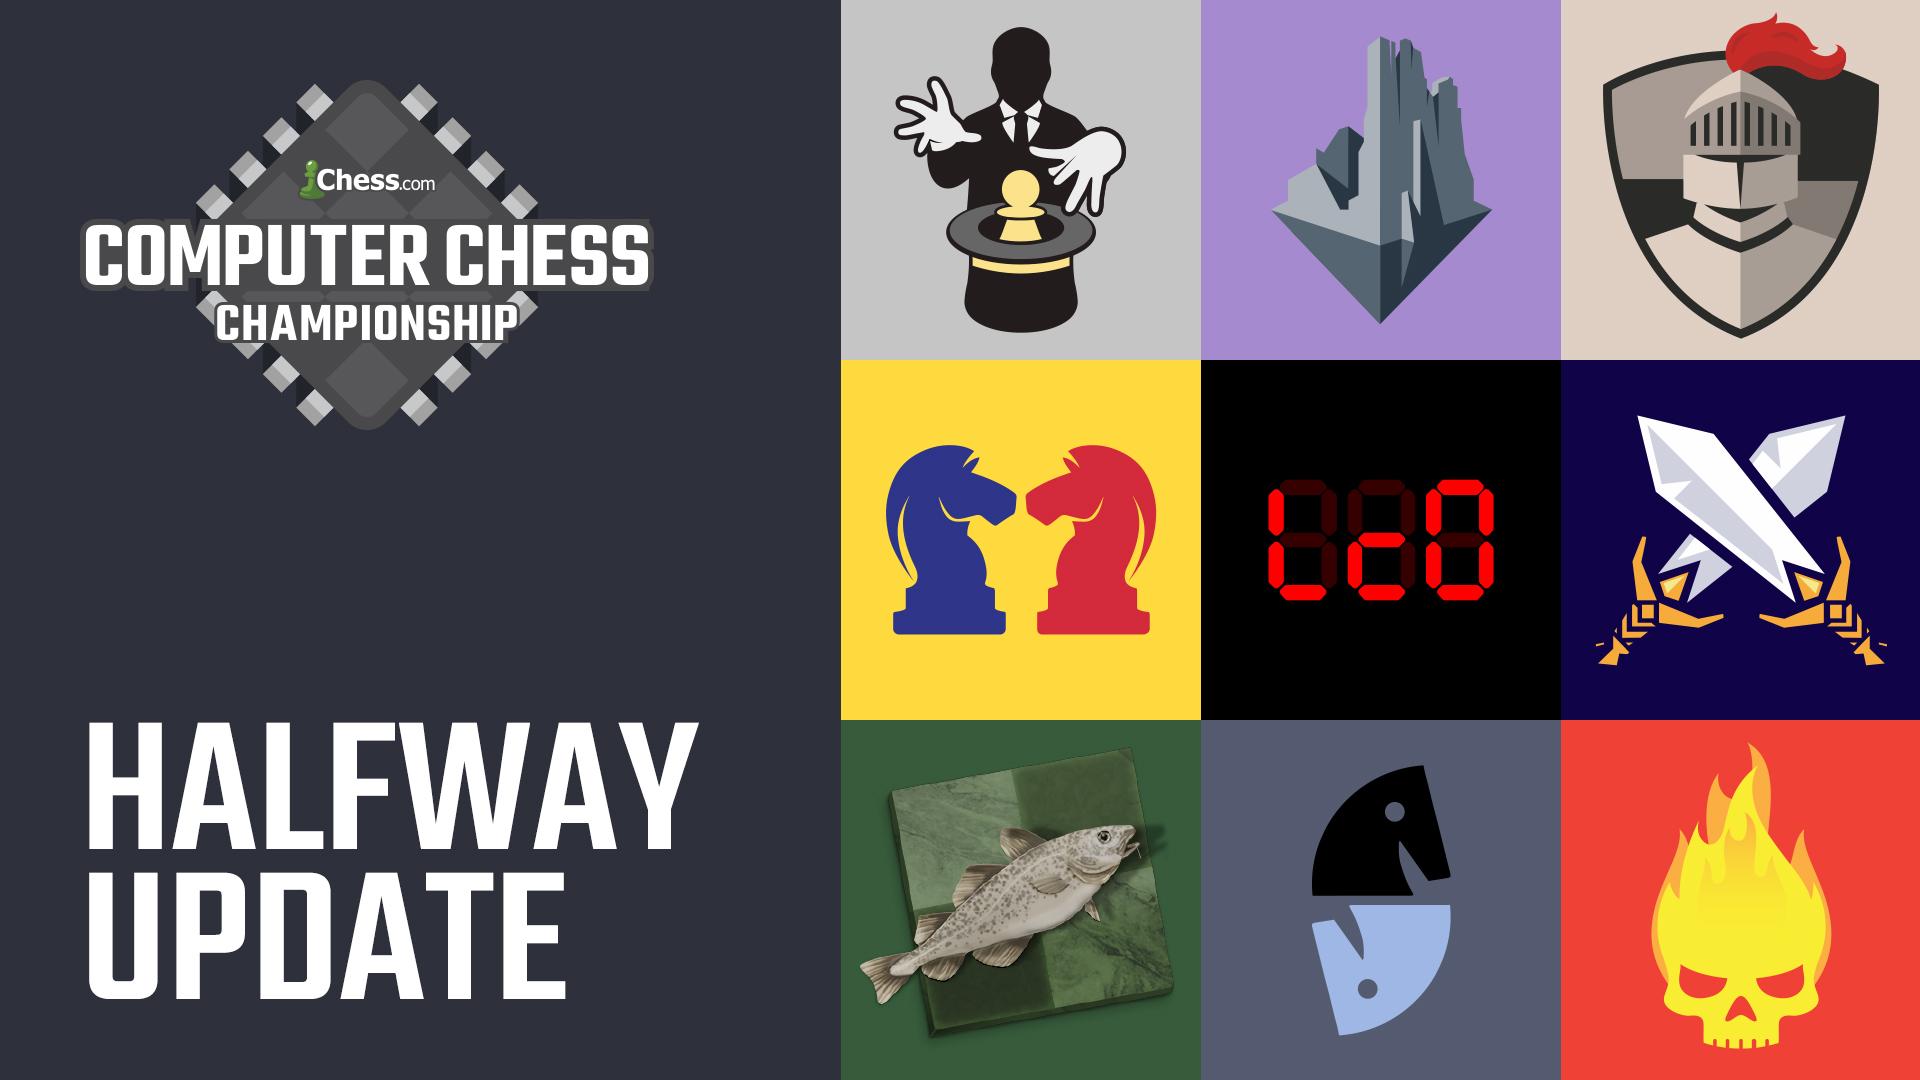 Stockfish Faces Lc0 In Computer Chess Championship Finals 